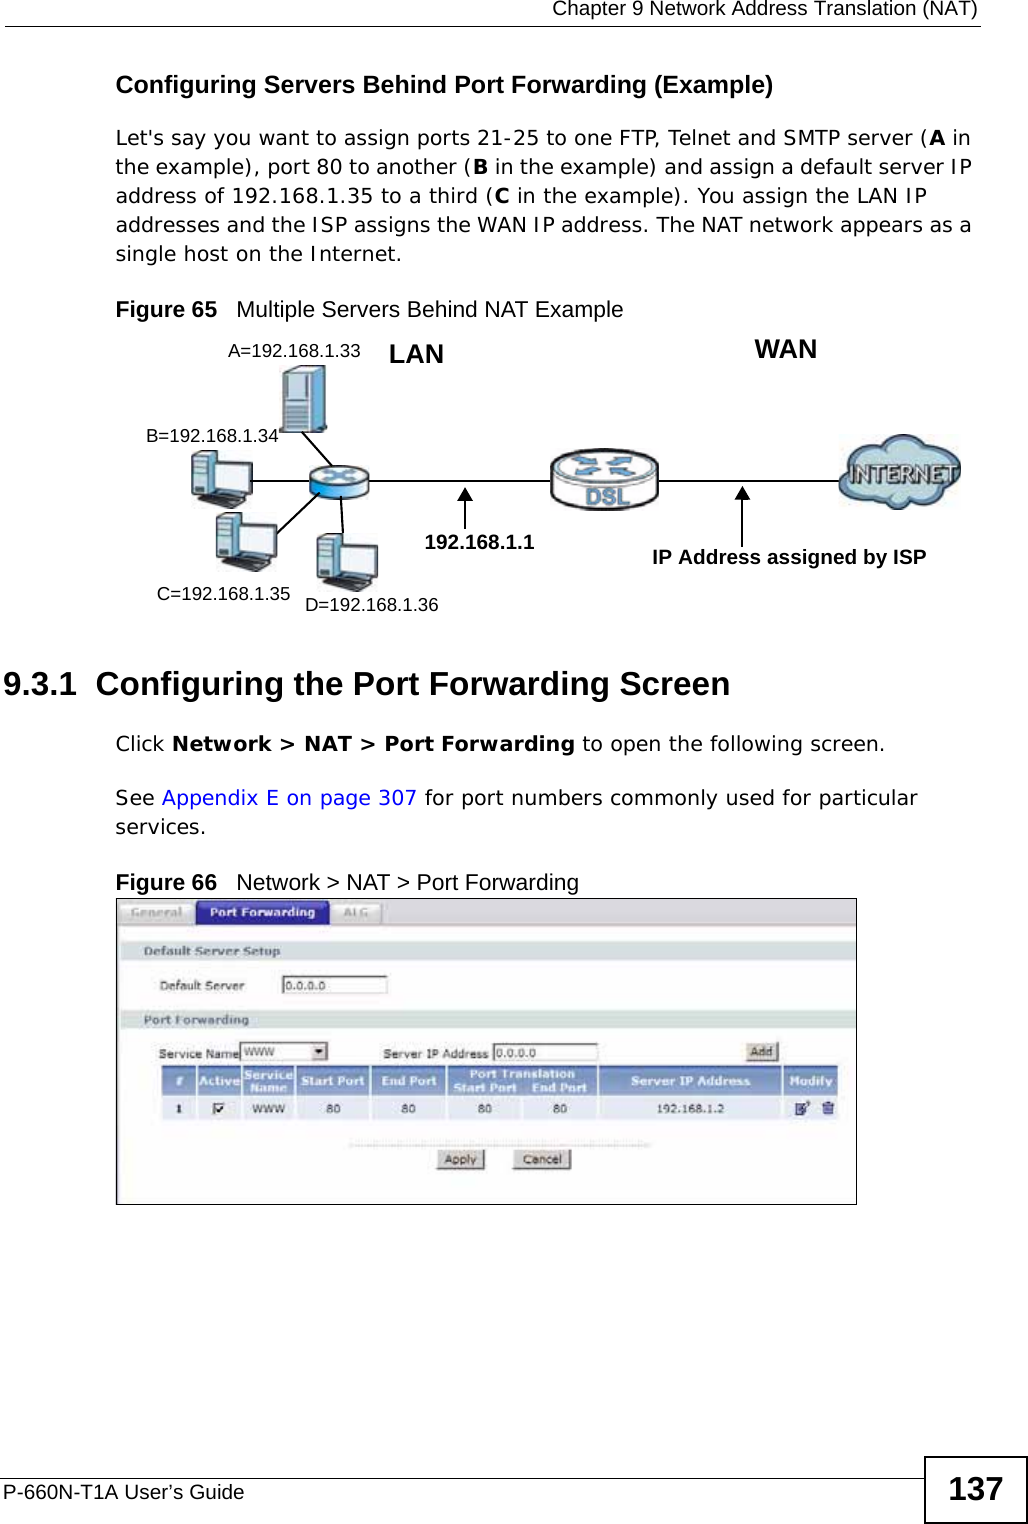  Chapter 9 Network Address Translation (NAT)P-660N-T1A User’s Guide 137Configuring Servers Behind Port Forwarding (Example)Let&apos;s say you want to assign ports 21-25 to one FTP, Telnet and SMTP server (A in the example), port 80 to another (B in the example) and assign a default server IP address of 192.168.1.35 to a third (C in the example). You assign the LAN IP addresses and the ISP assigns the WAN IP address. The NAT network appears as a single host on the Internet.Figure 65   Multiple Servers Behind NAT Example9.3.1  Configuring the Port Forwarding ScreenClick Network &gt; NAT &gt; Port Forwarding to open the following screen.See Appendix E on page 307 for port numbers commonly used for particular services. Figure 66   Network &gt; NAT &gt; Port ForwardingA=192.168.1.33D=192.168.1.36C=192.168.1.35B=192.168.1.34WANLAN192.168.1.1 IP Address assigned by ISP